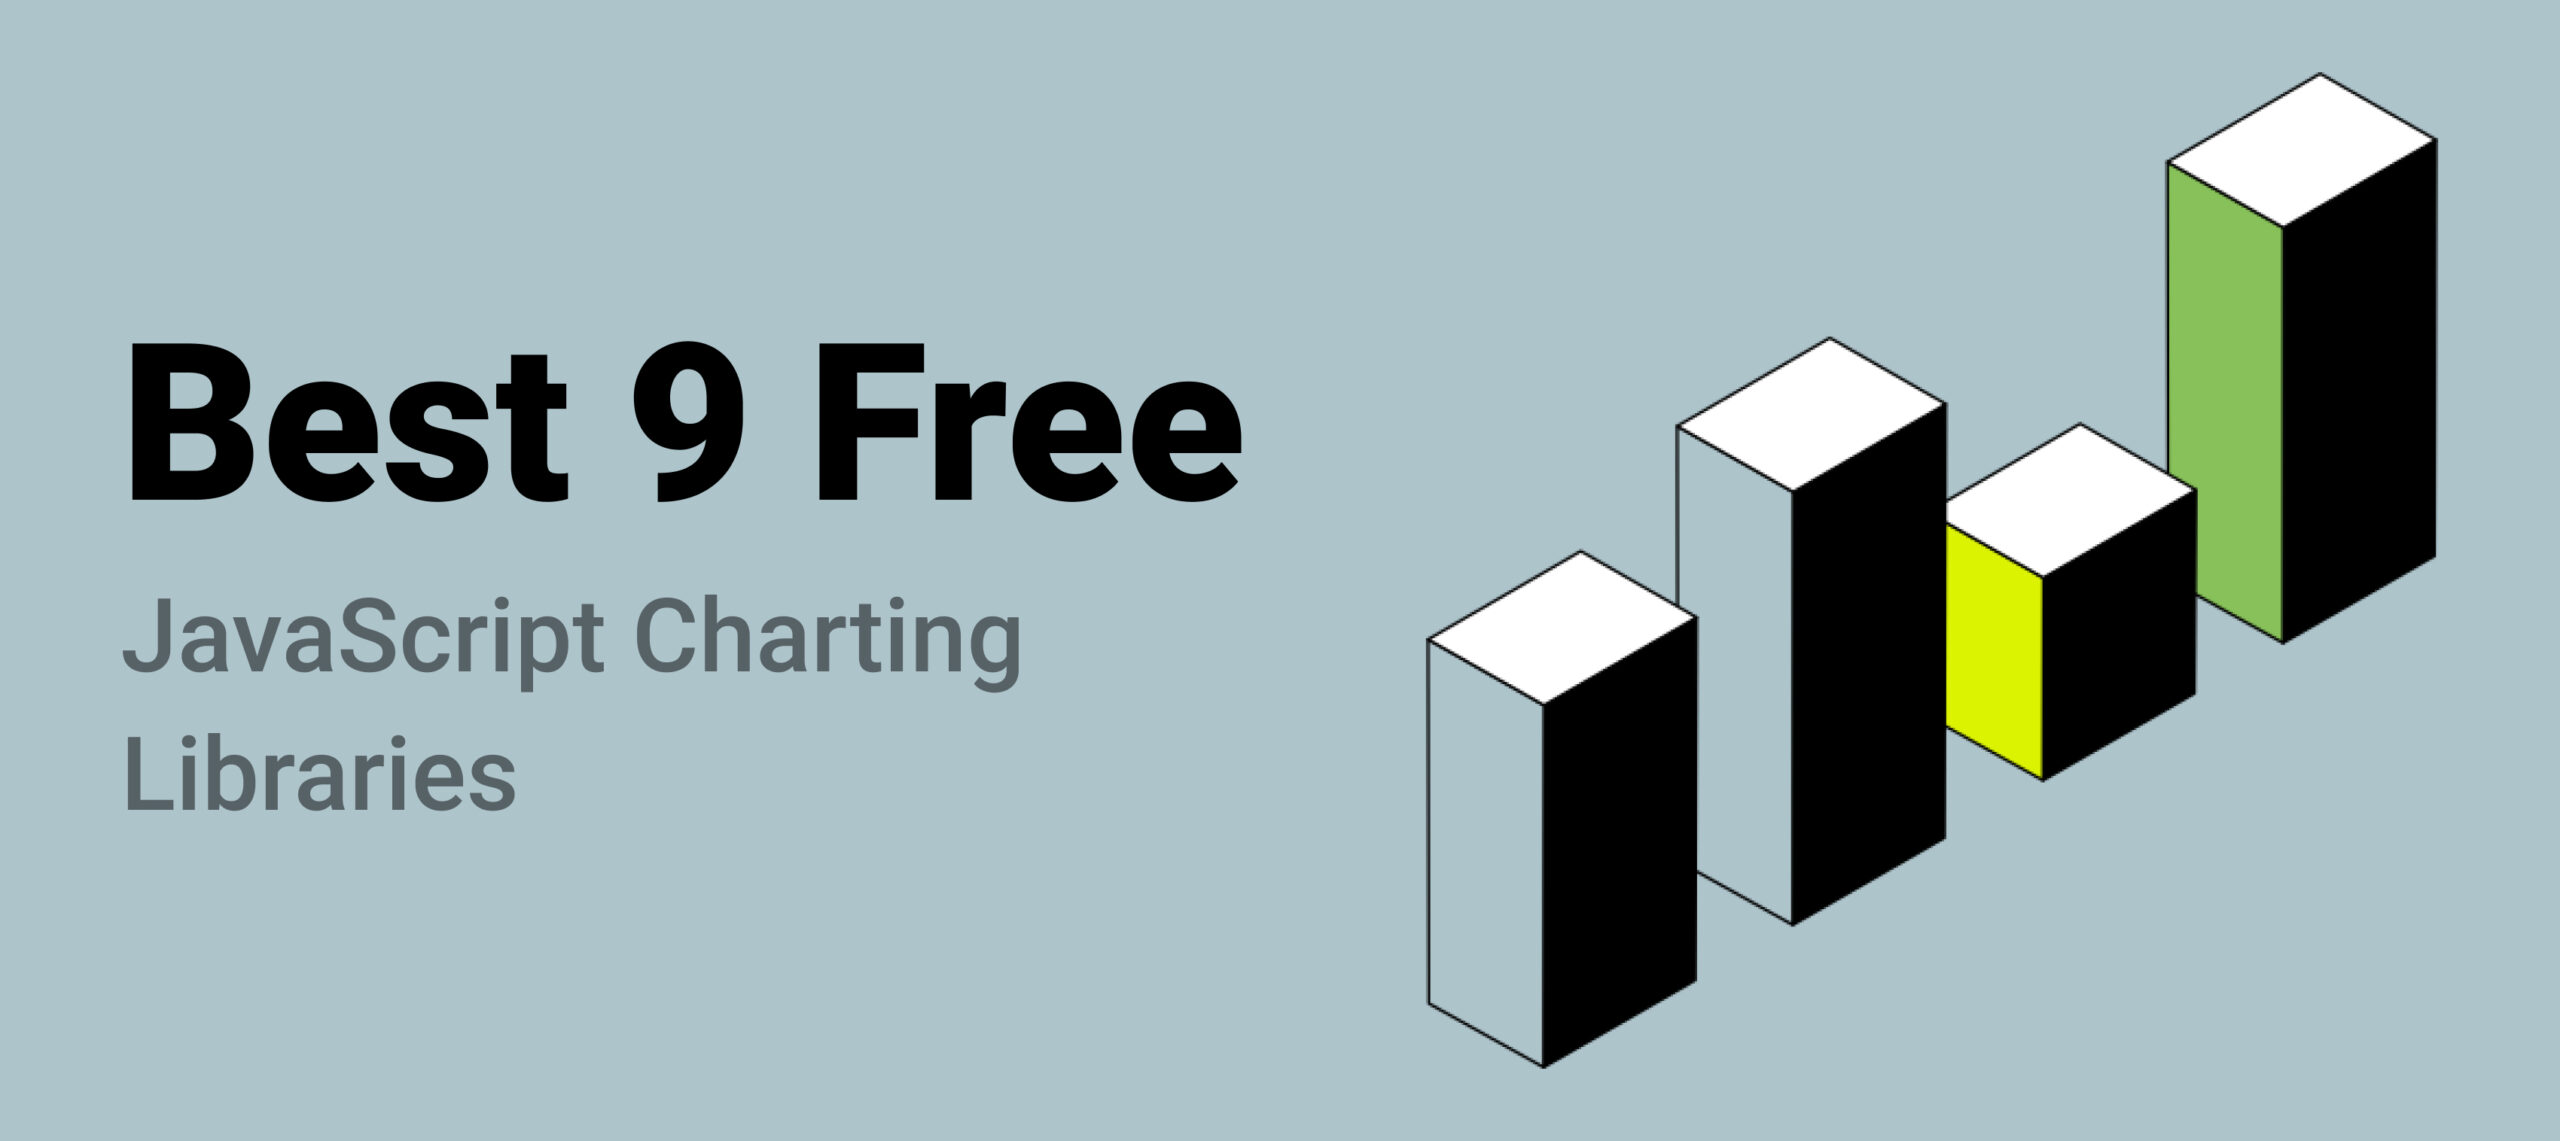  Best 9 Free JavaScript Charting Libraries